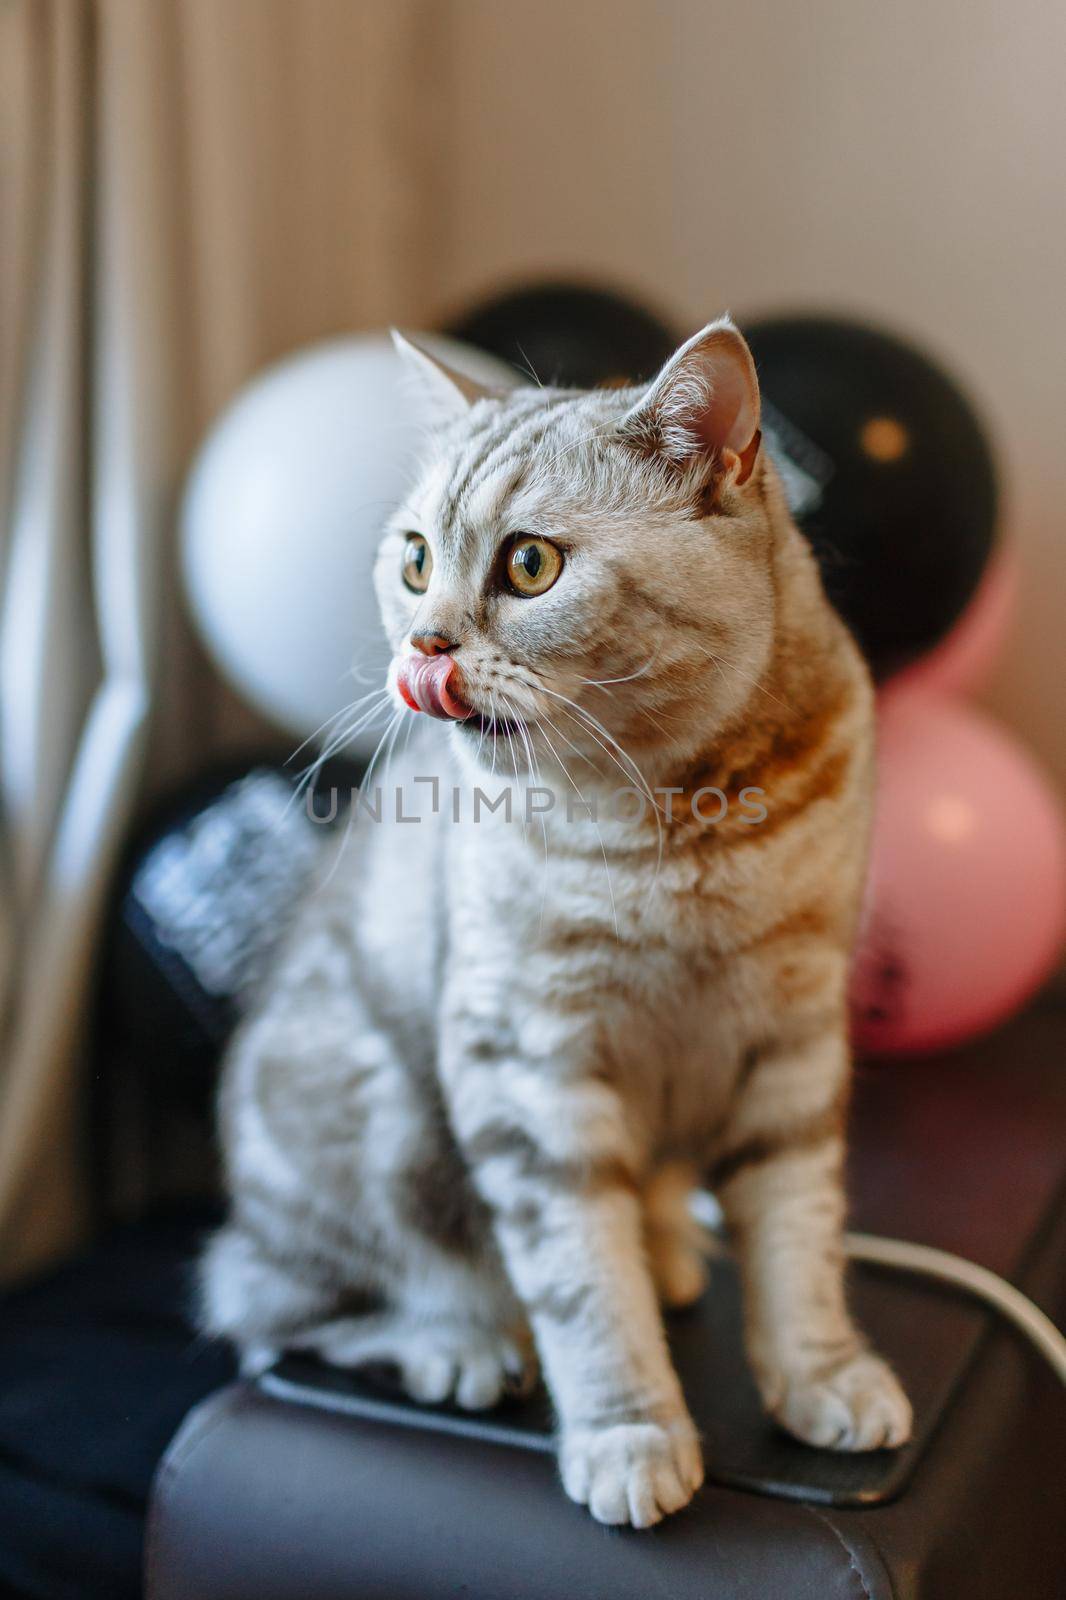 Cat, licking his mouth, against the background of balloons by deandy